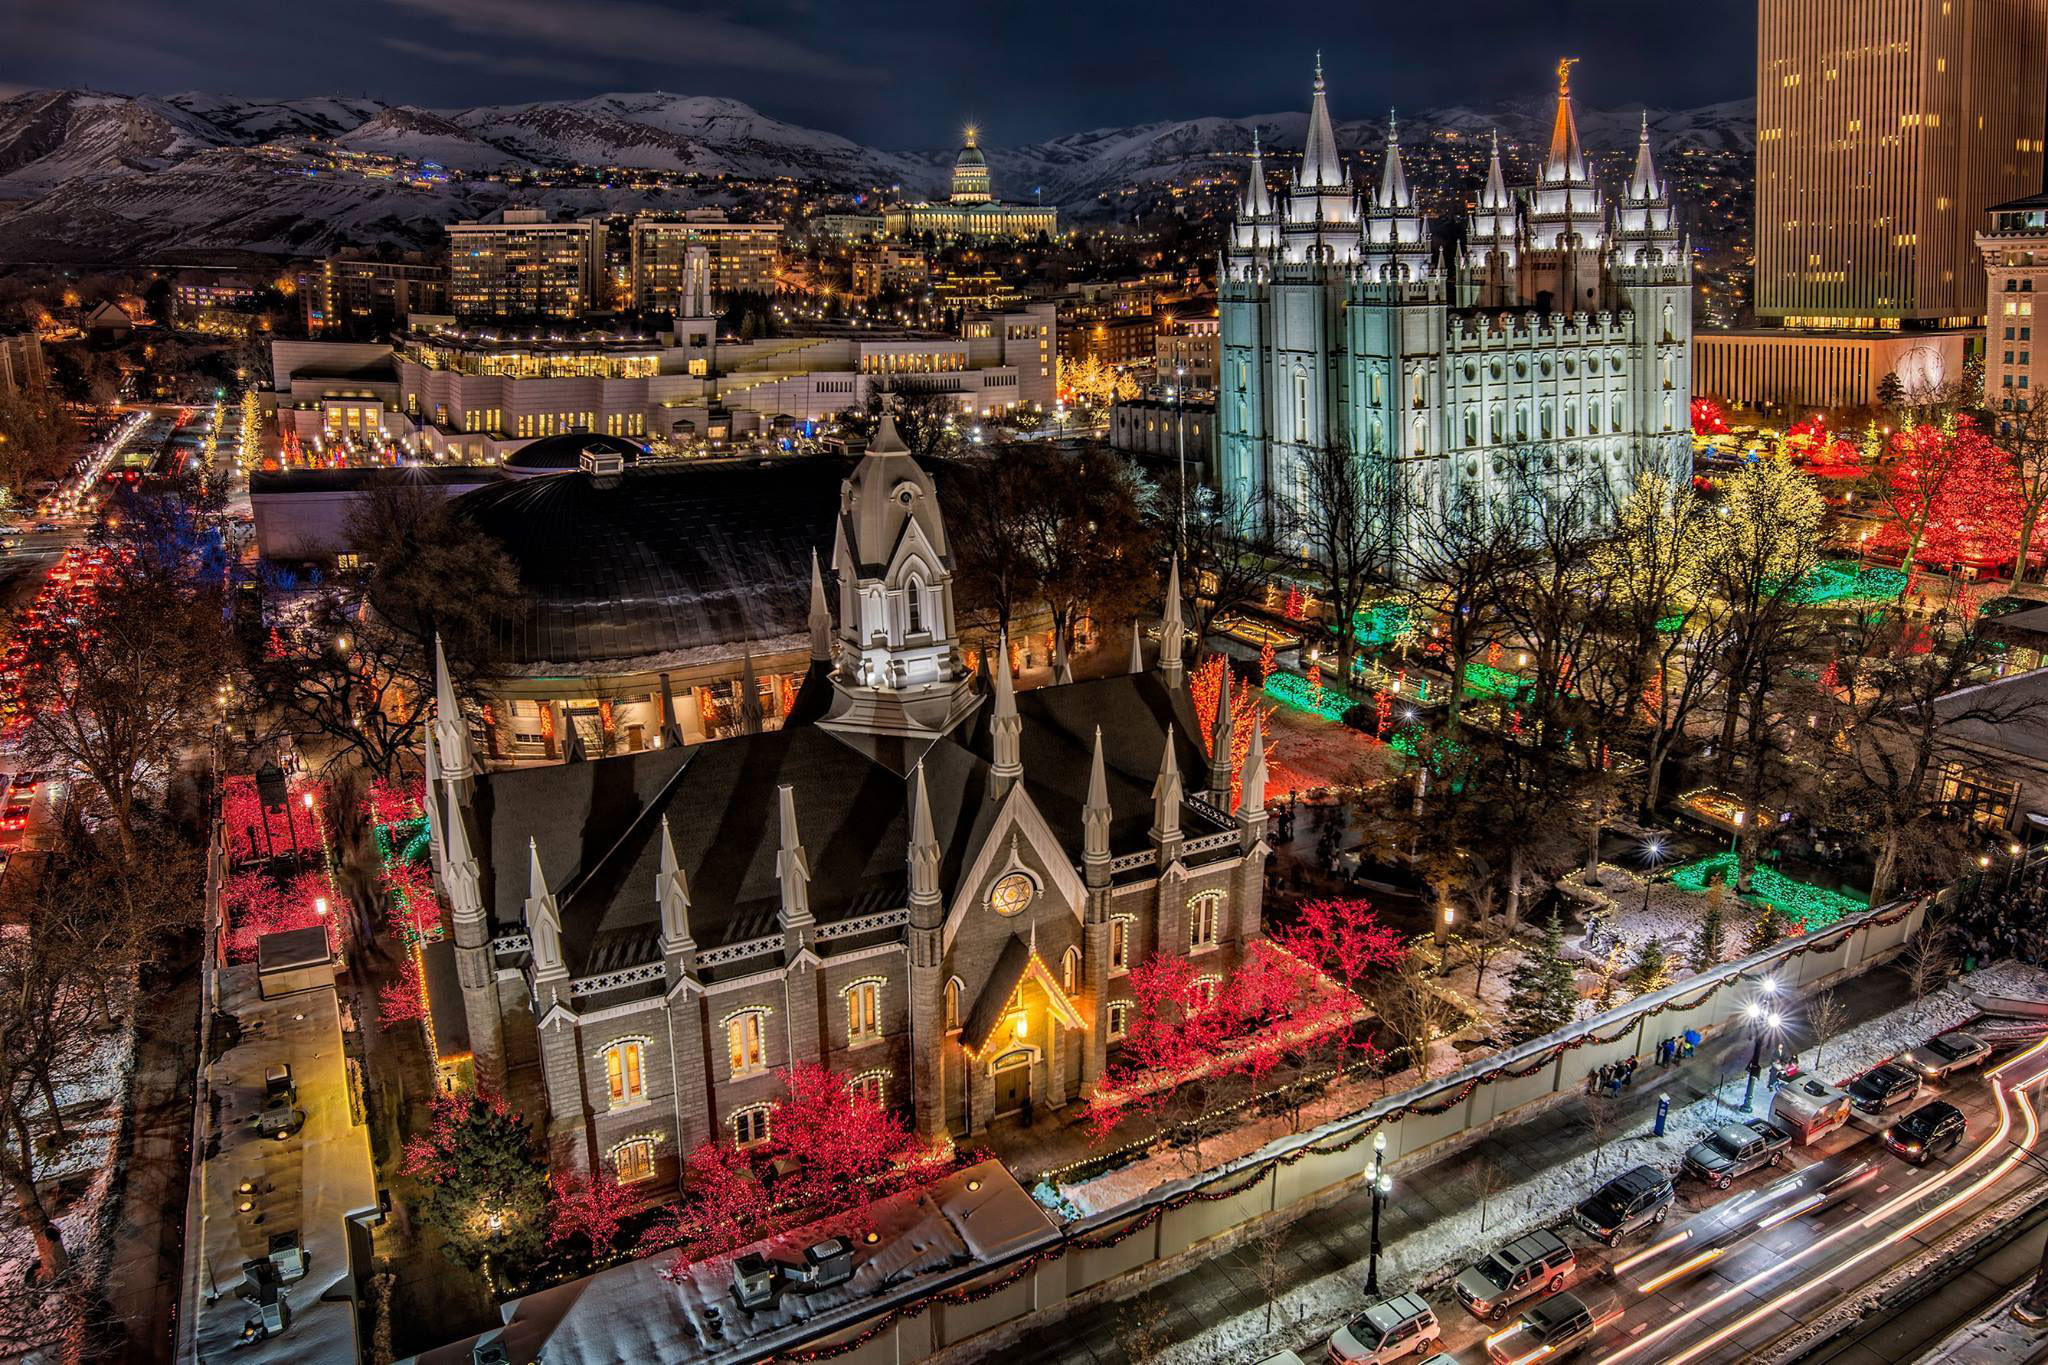 An image of Temple Square at Christmas. In the foreground is the chapel on temple square, and in the background is the temple. All around in the trees and bushes are bright Christmas lights. Other Salt Lake City building are visible in the background behind the temple.